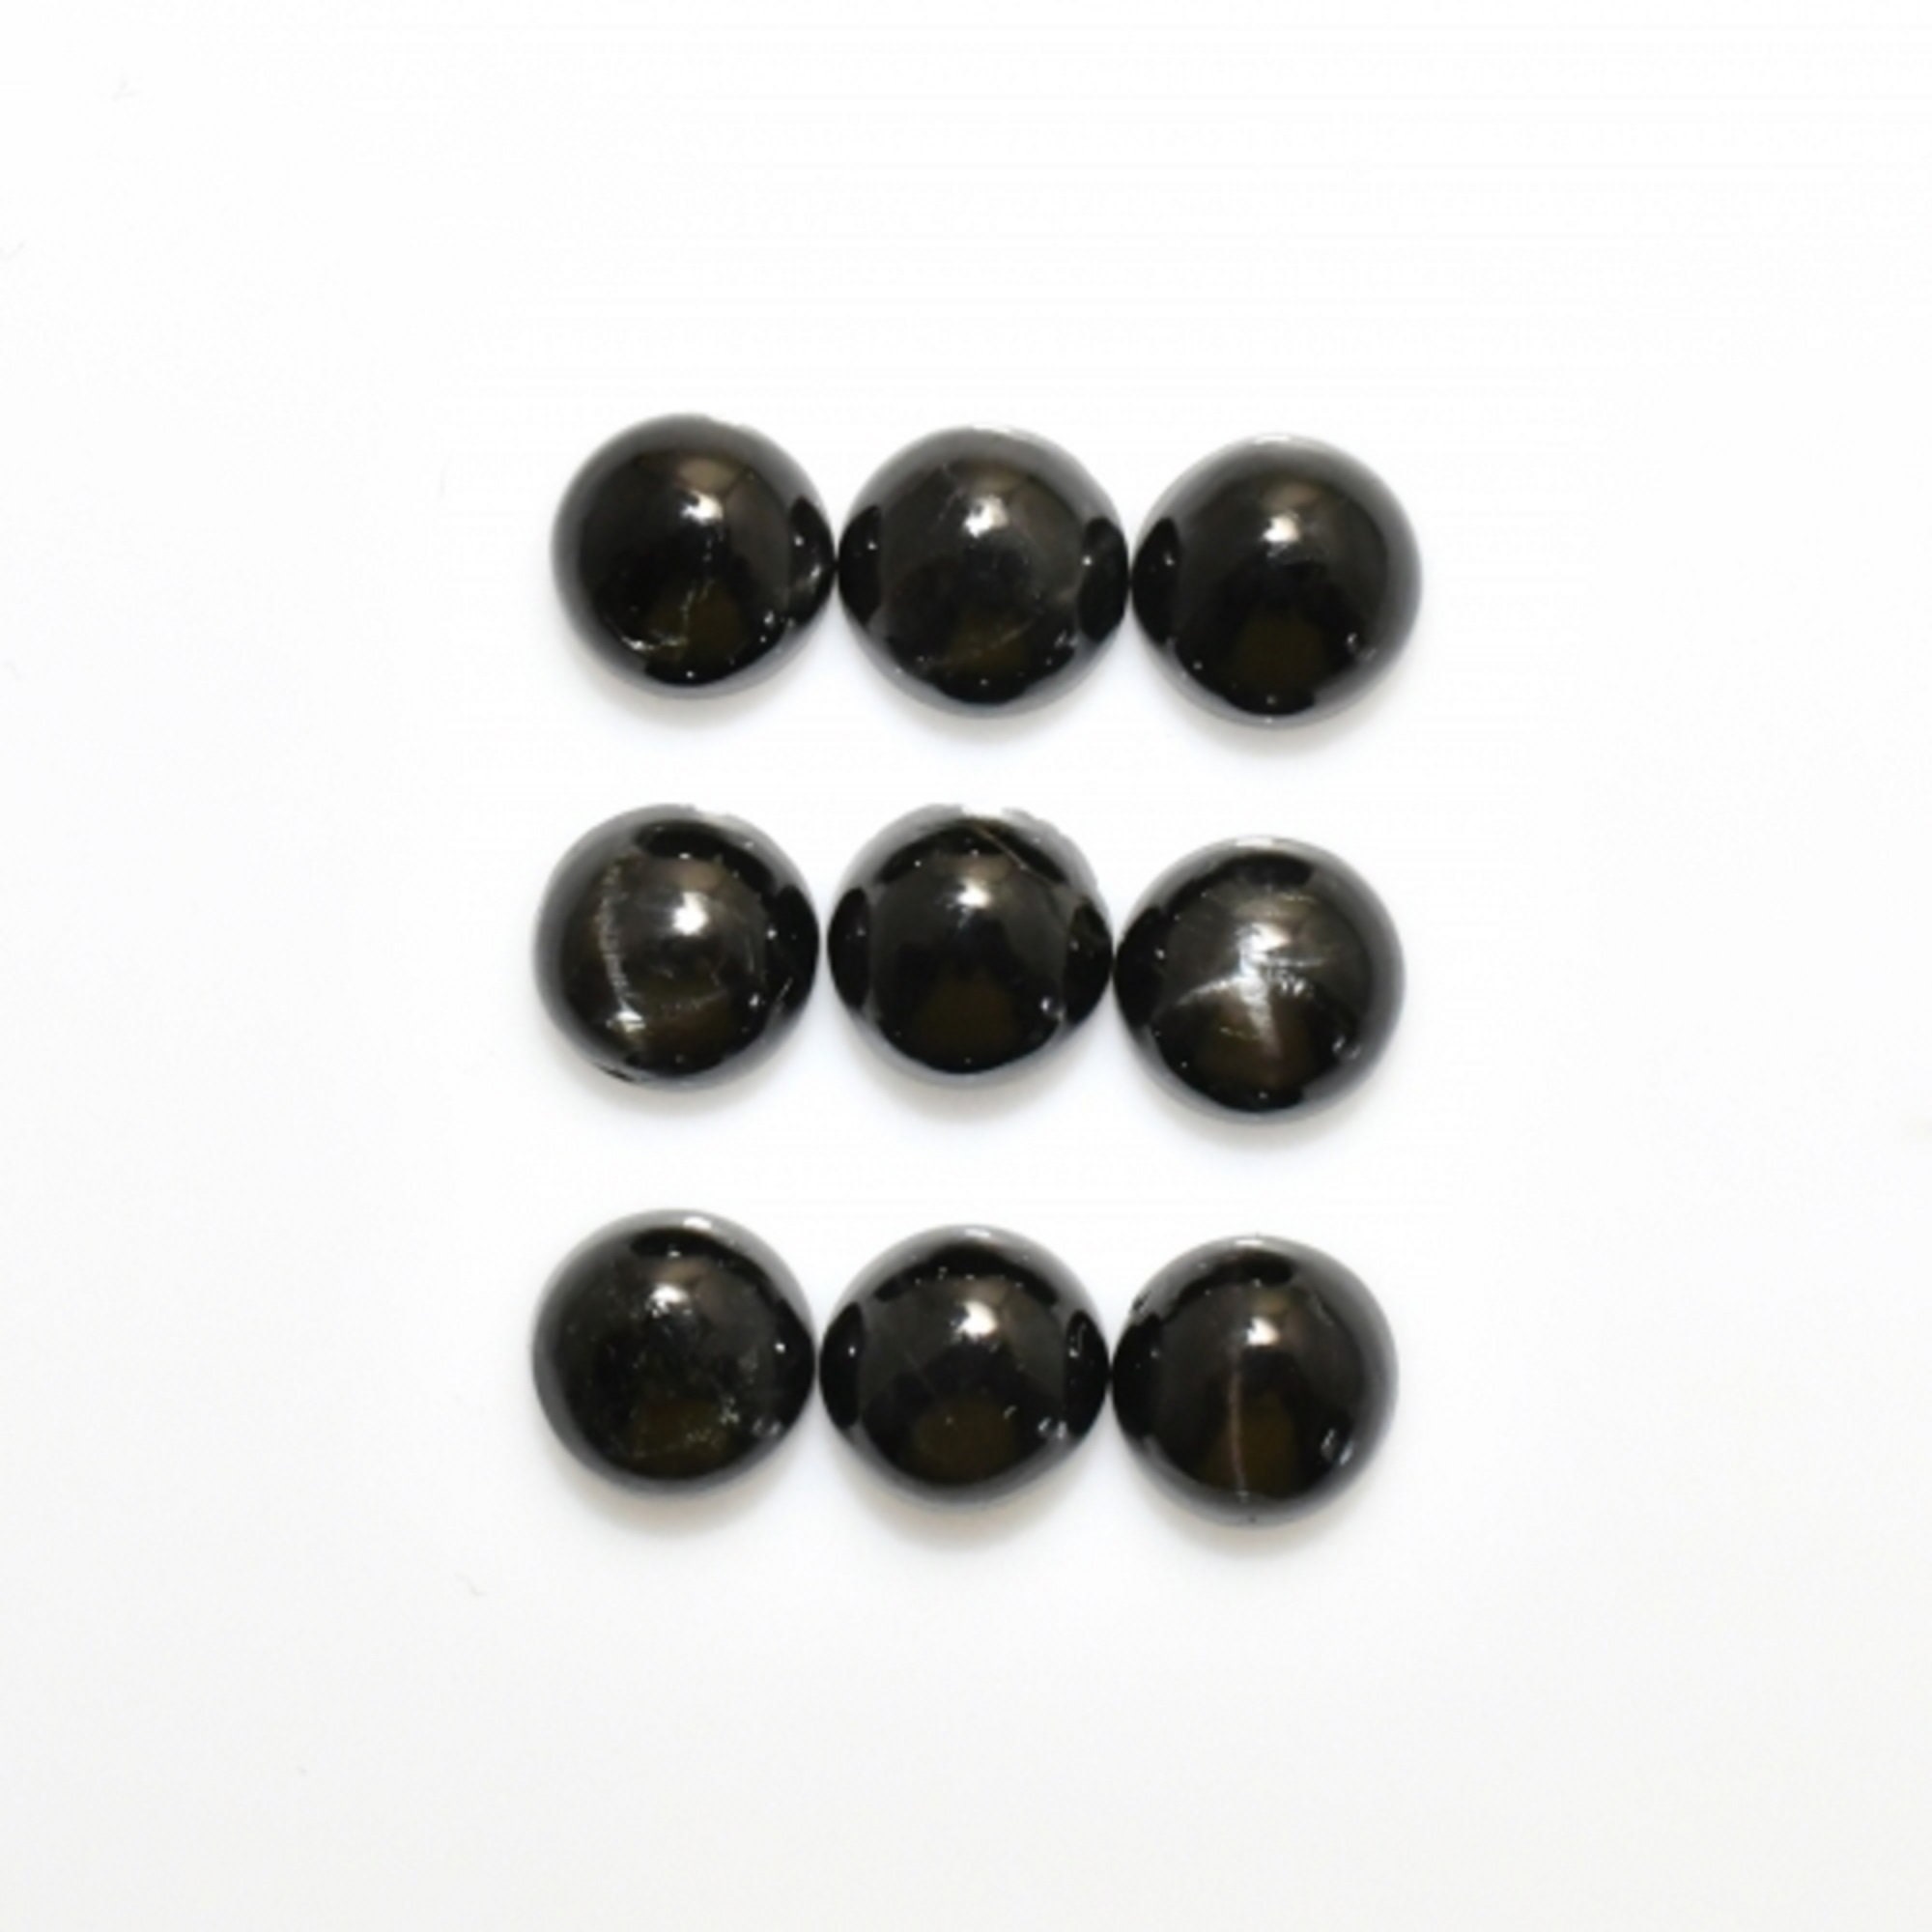 Black Star Diopside Cab Round 7mm Approximately 15 Carat - Etsy